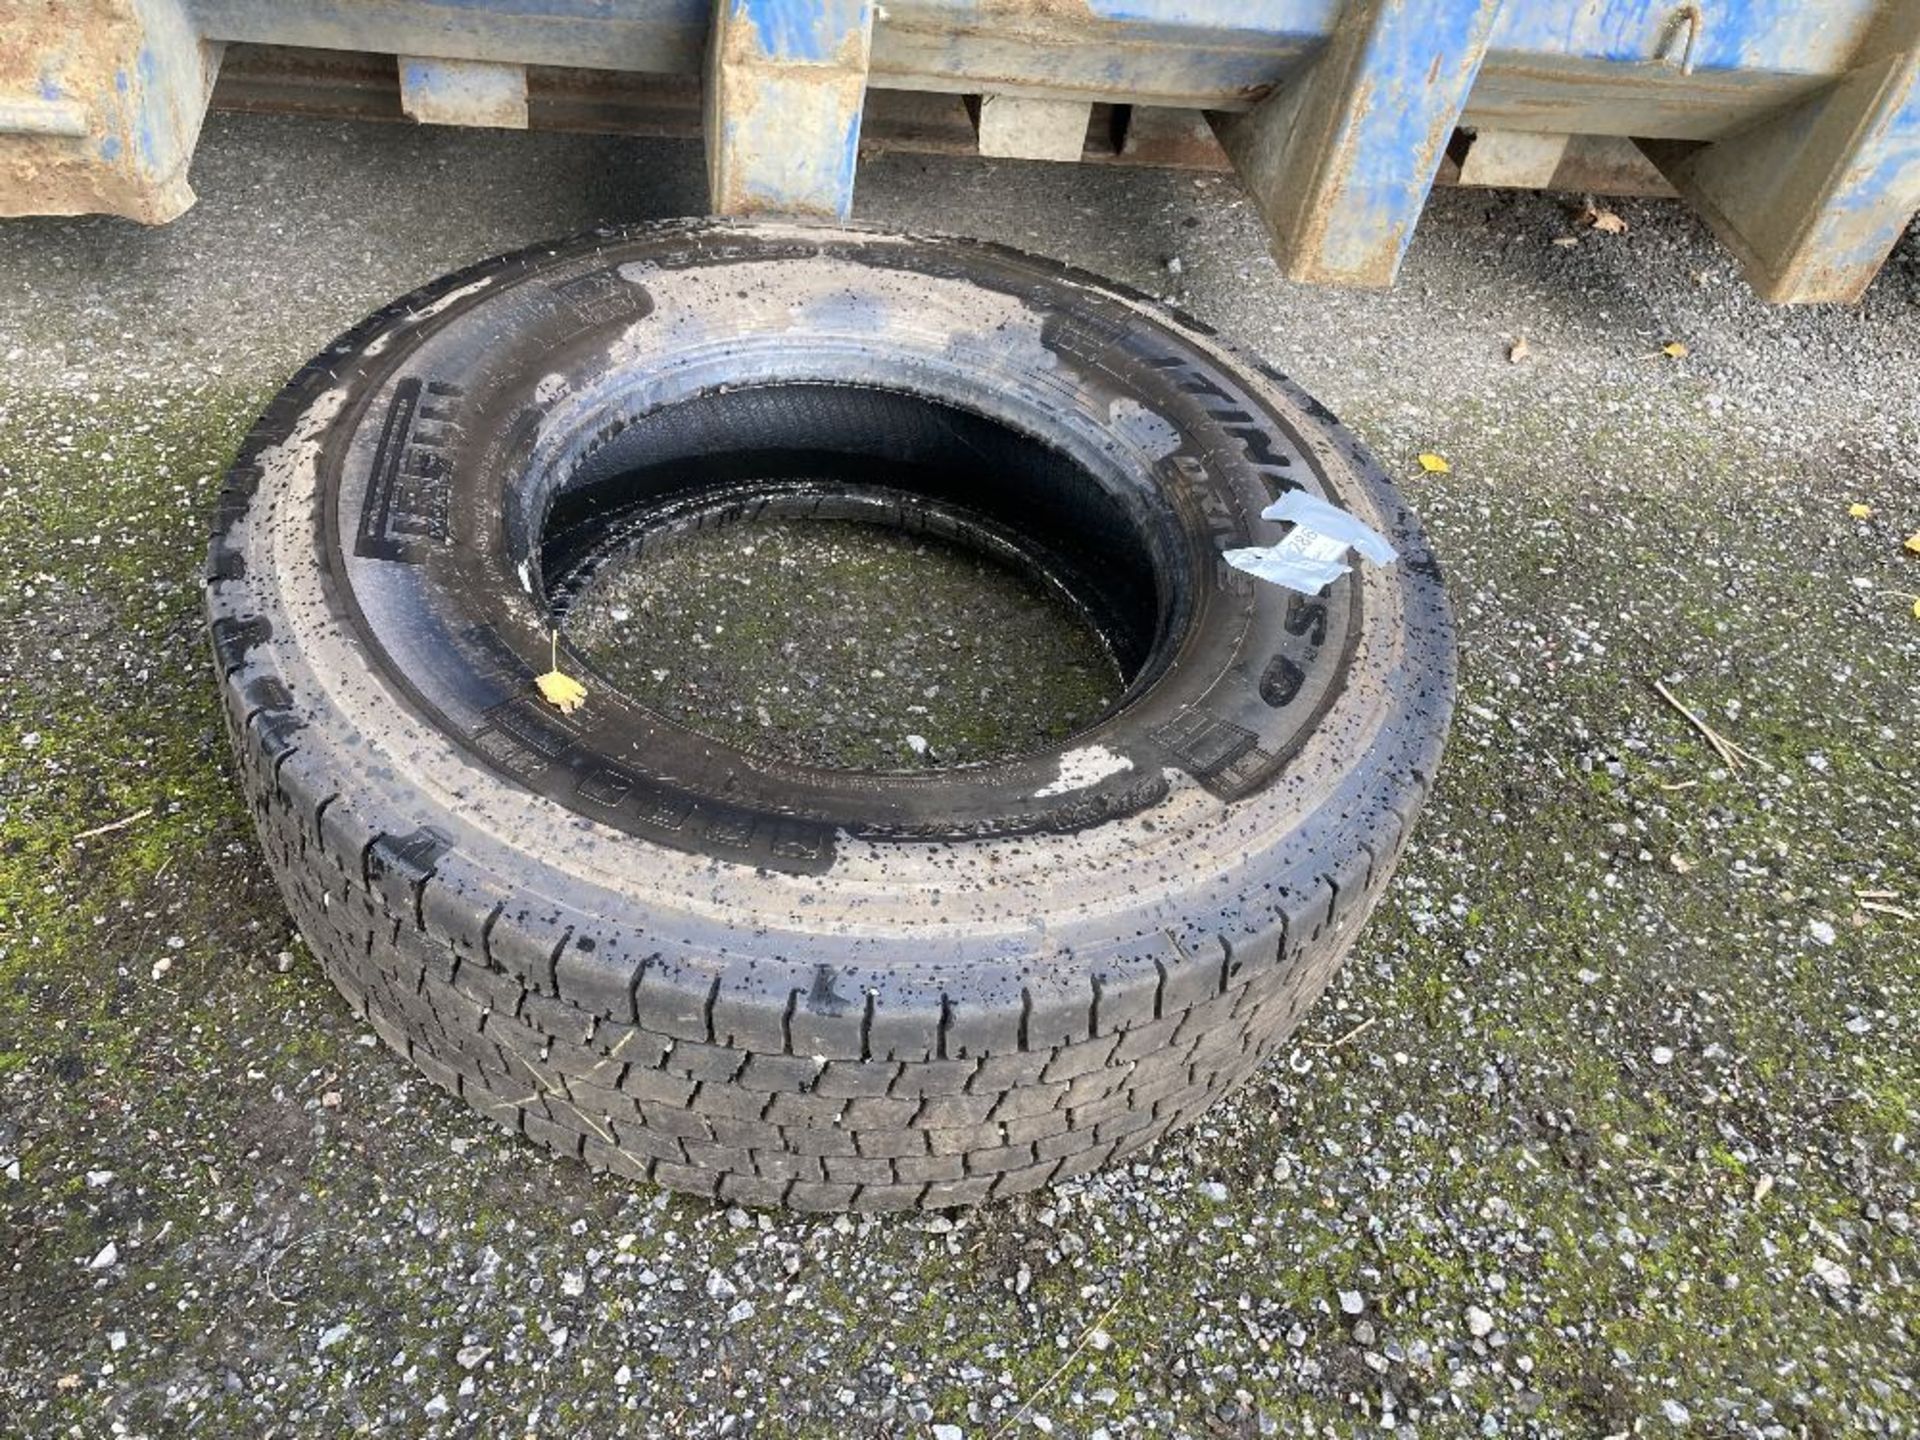 Pirelli Itineris D 315/80R 22.5 radial tubeless regroovable HGV tyre - Image 2 of 6